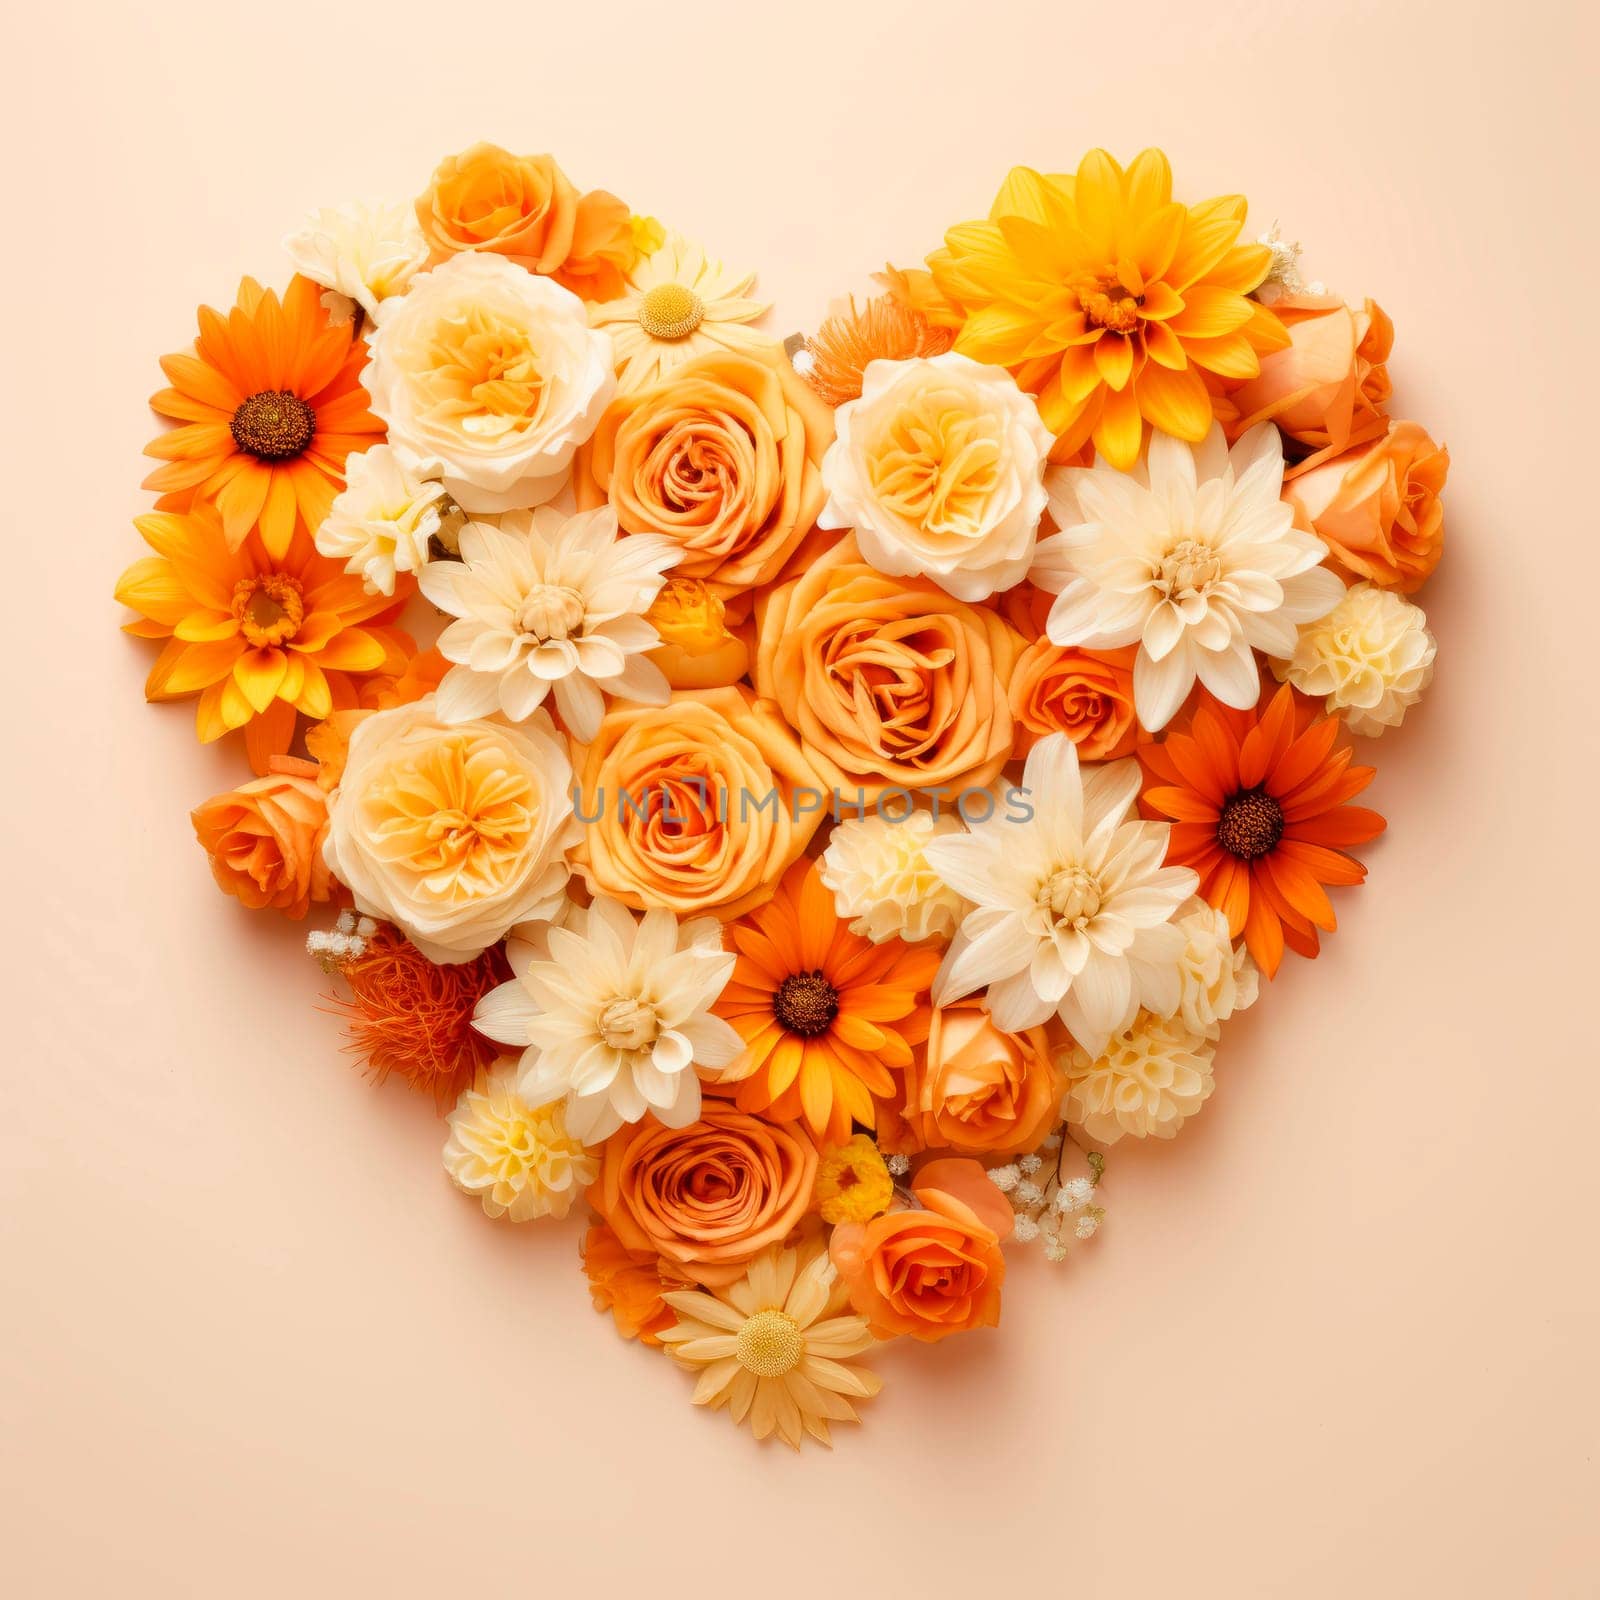 The heart is lined with beautiful multicolored flowers in a yellow-orange scale by Spirina